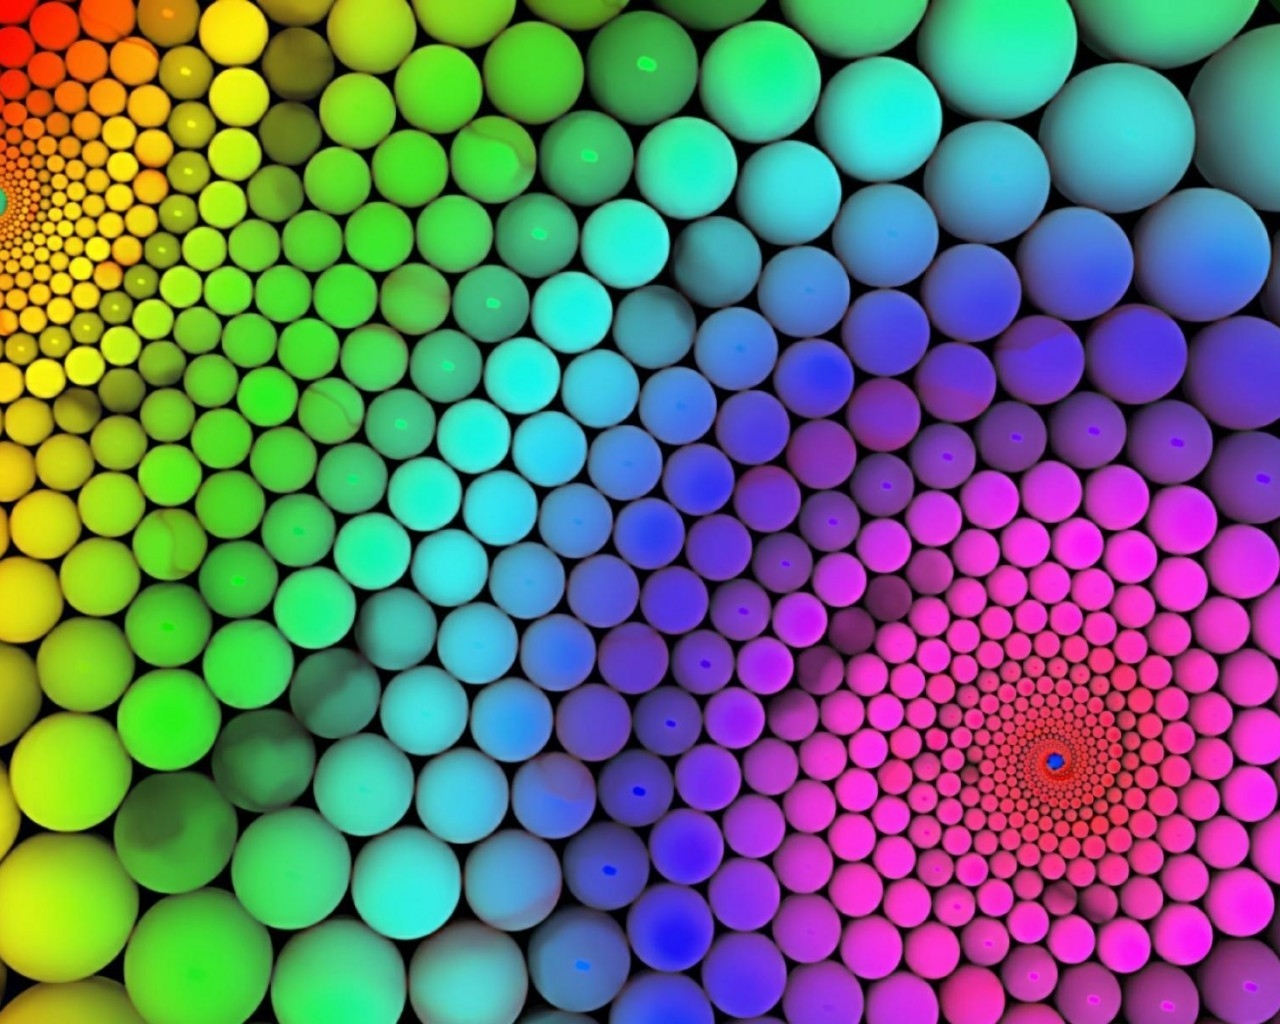 Colourful Balls for 1280 x 1024 resolution